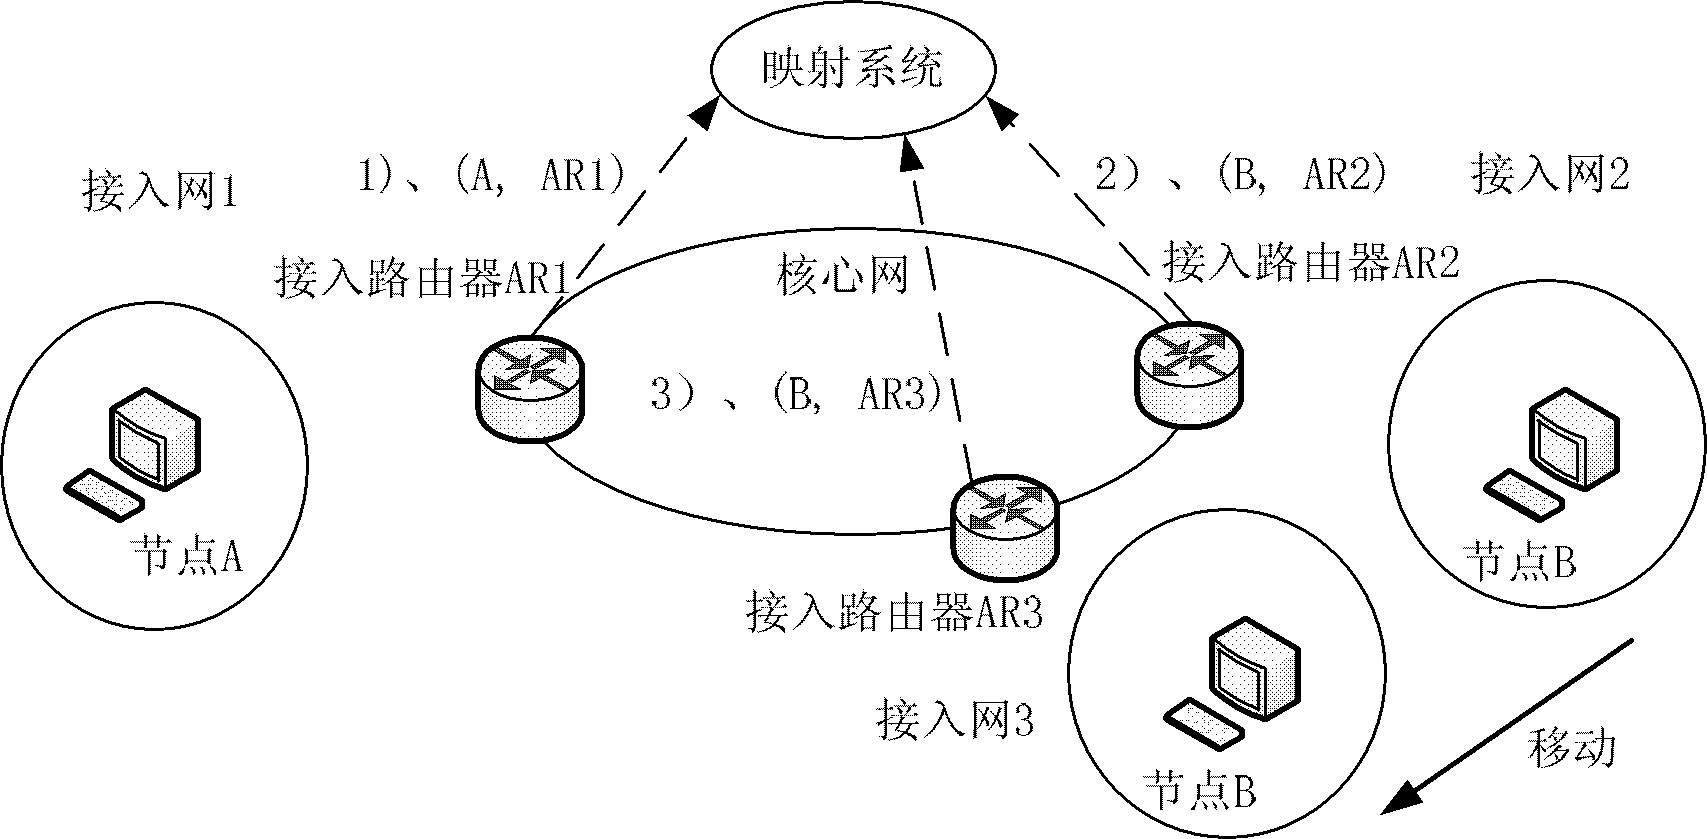 Method for solving mapping failure